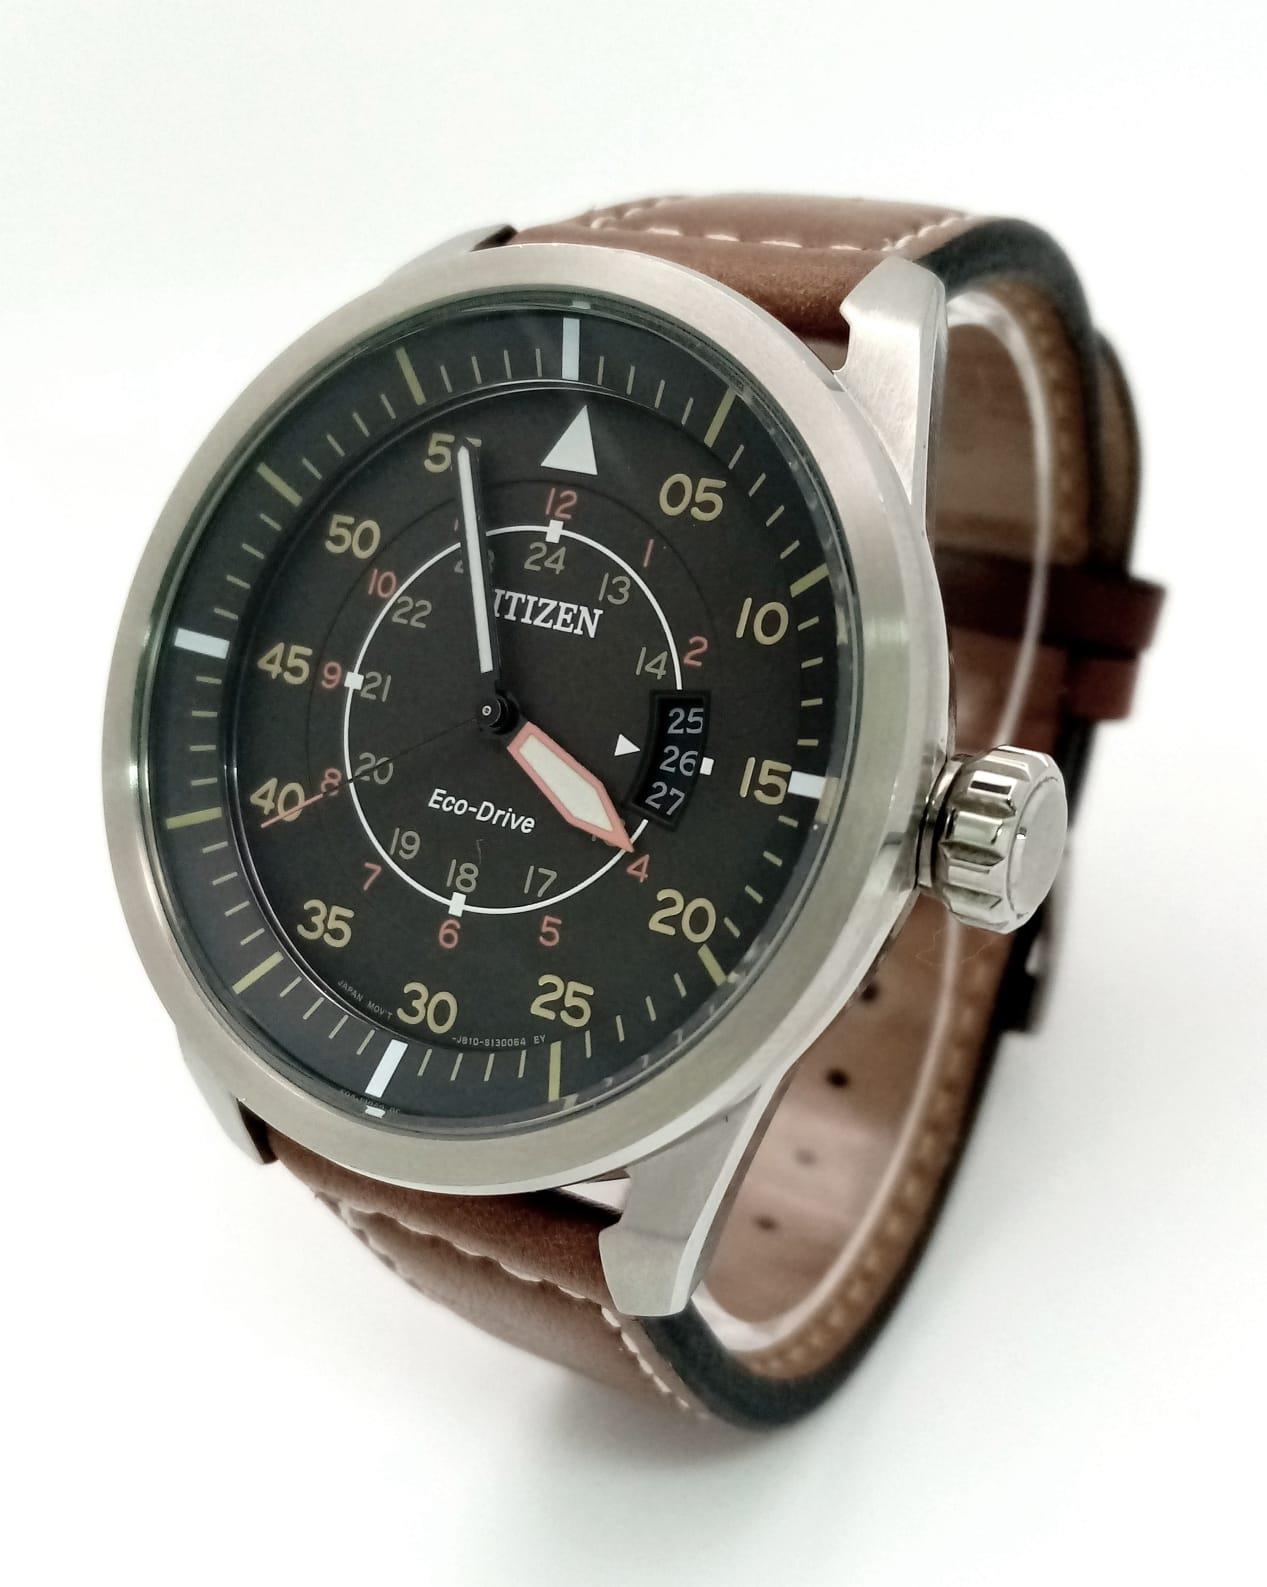 A Citizen Eco-Drive Gents Watch. Brown leather strap. Stainless steel case - 44mm. Black dial with - Image 2 of 7